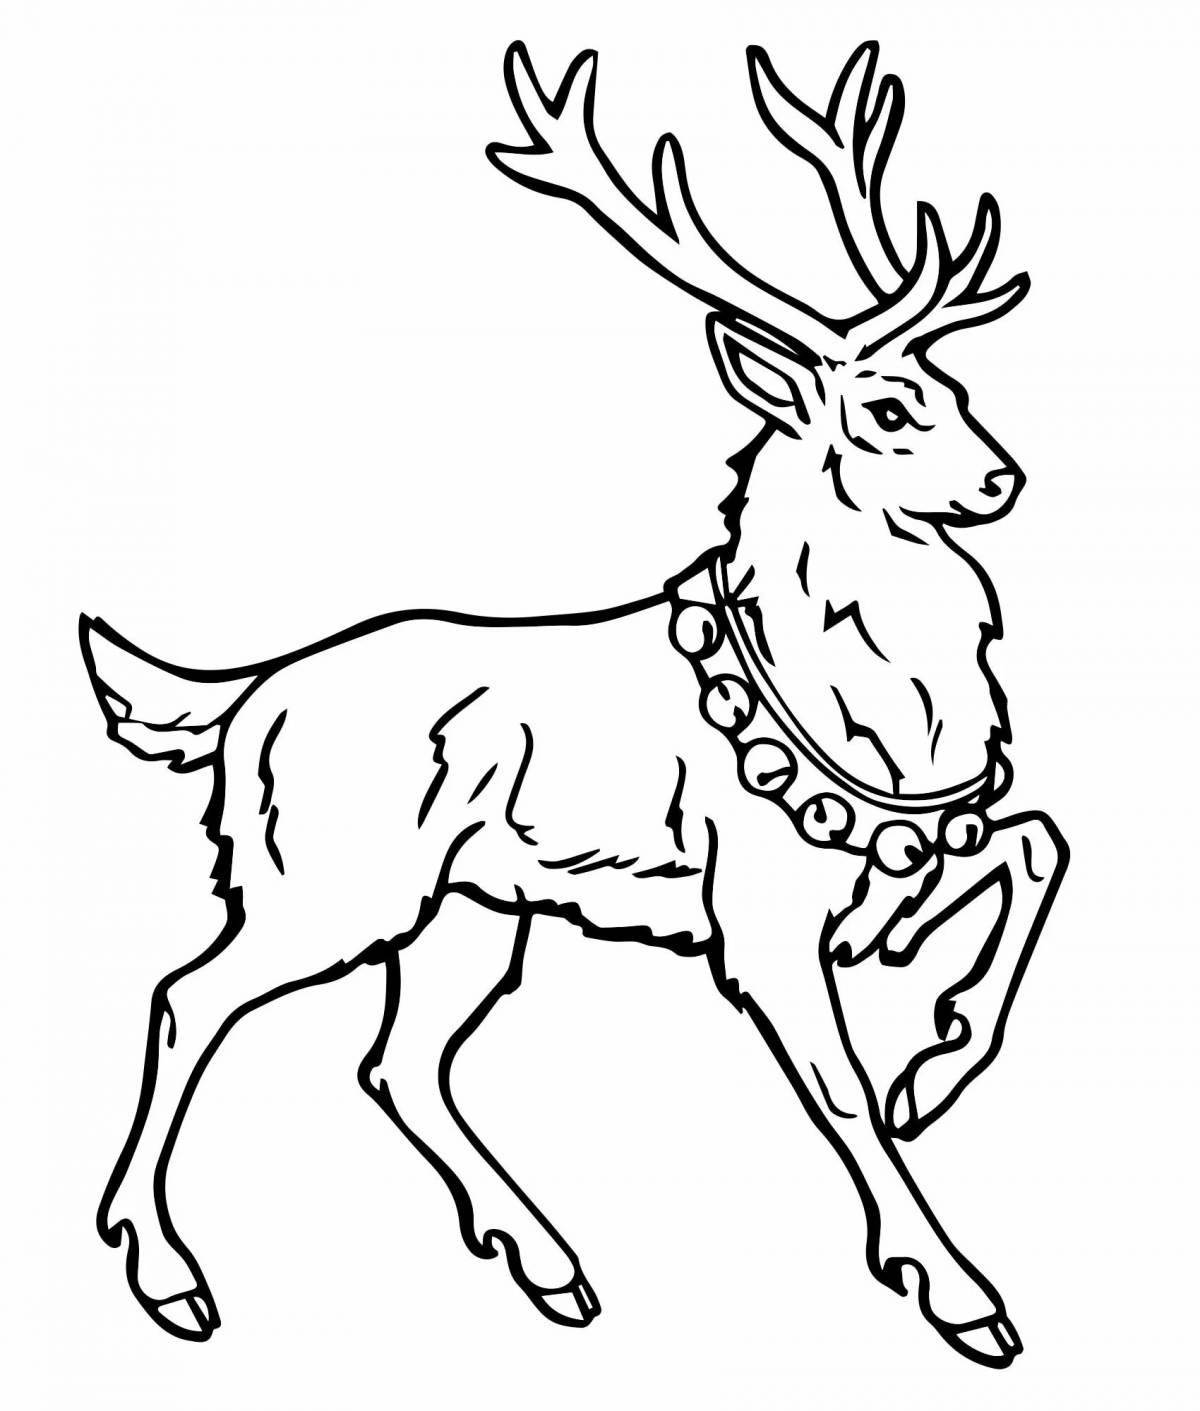 Shiny Christmas reindeer coloring book for kids